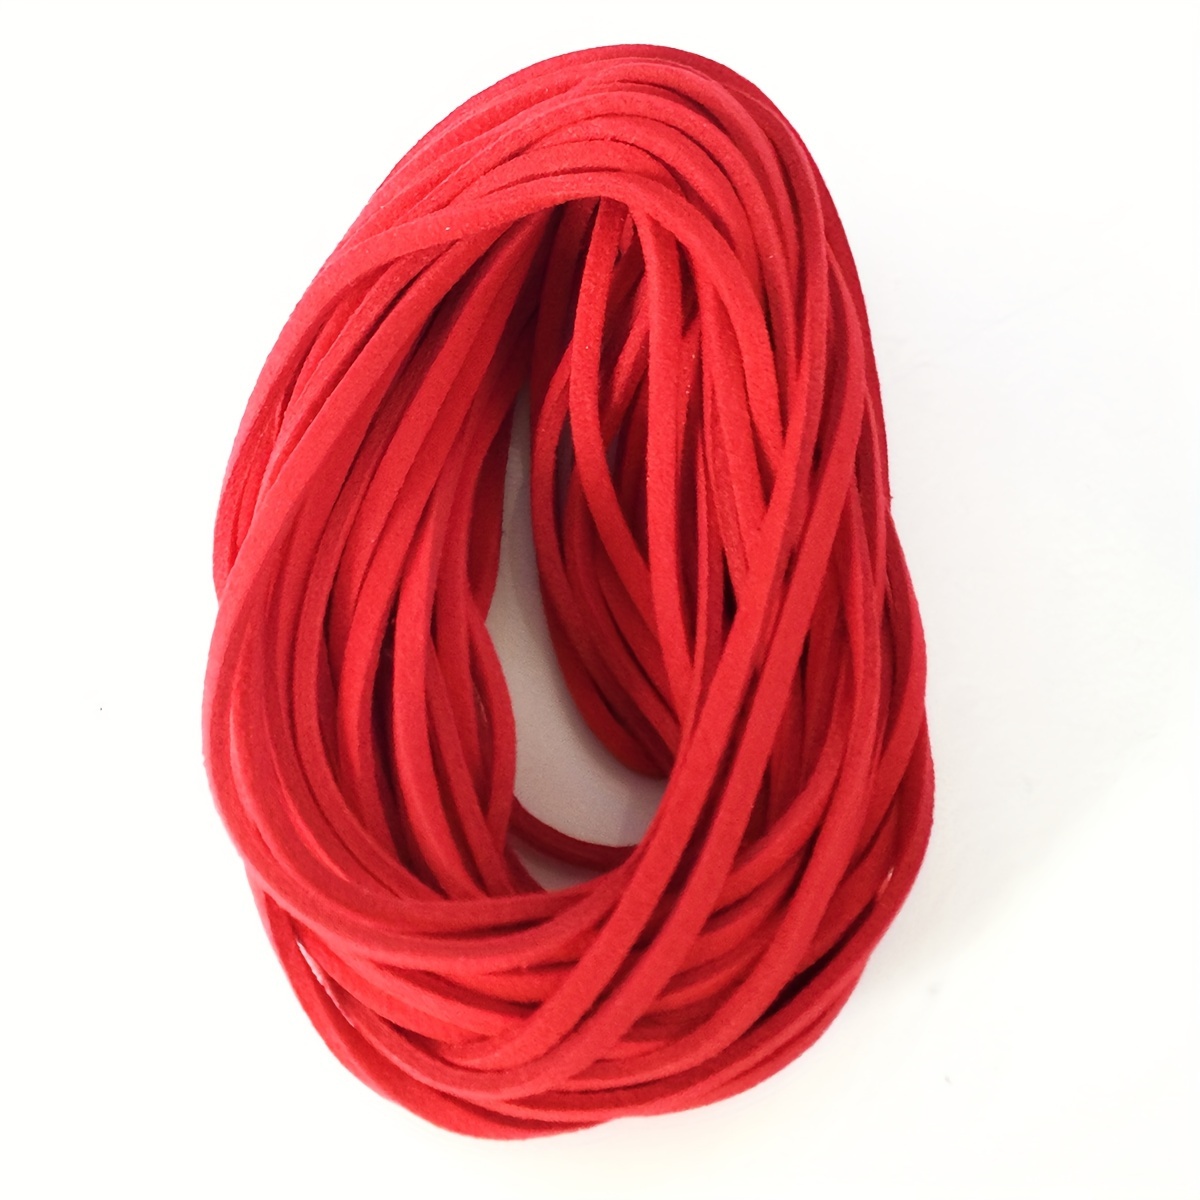 Faux Suede Cord: 3mm Flat Microsuede String, Red Orange Yellow